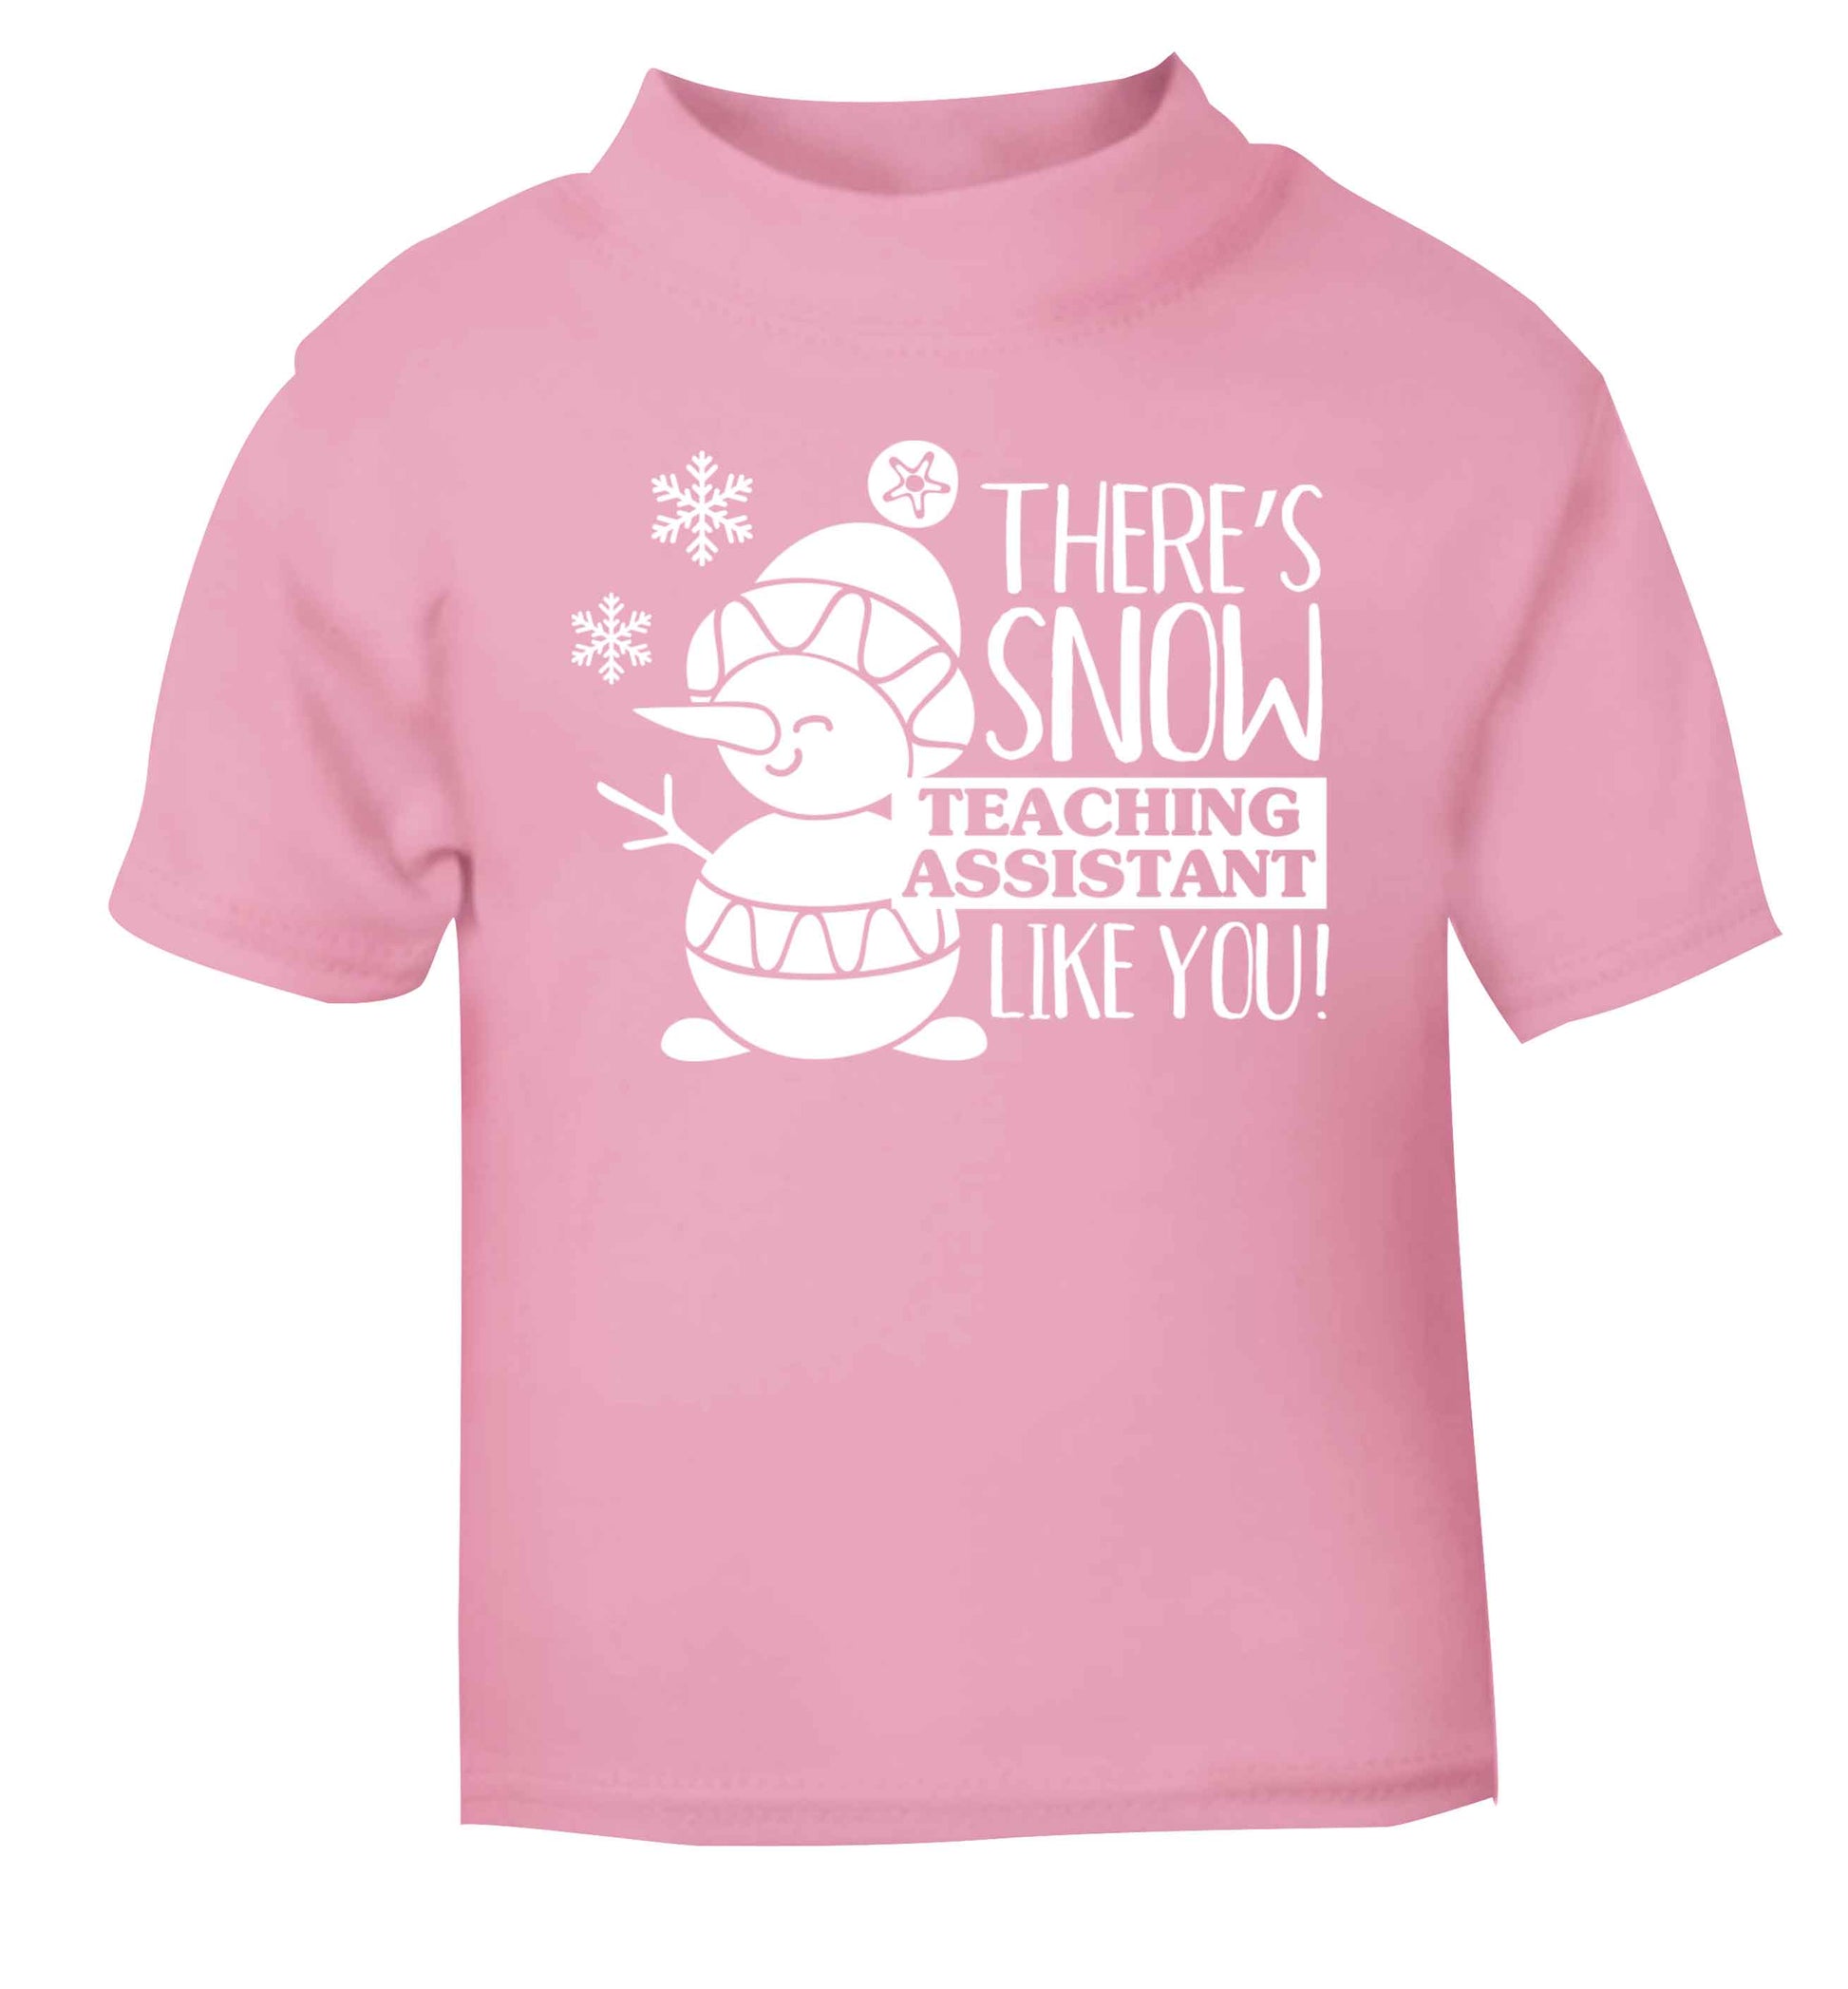 There's snow teaching assistant like you light pink baby toddler Tshirt 2 Years